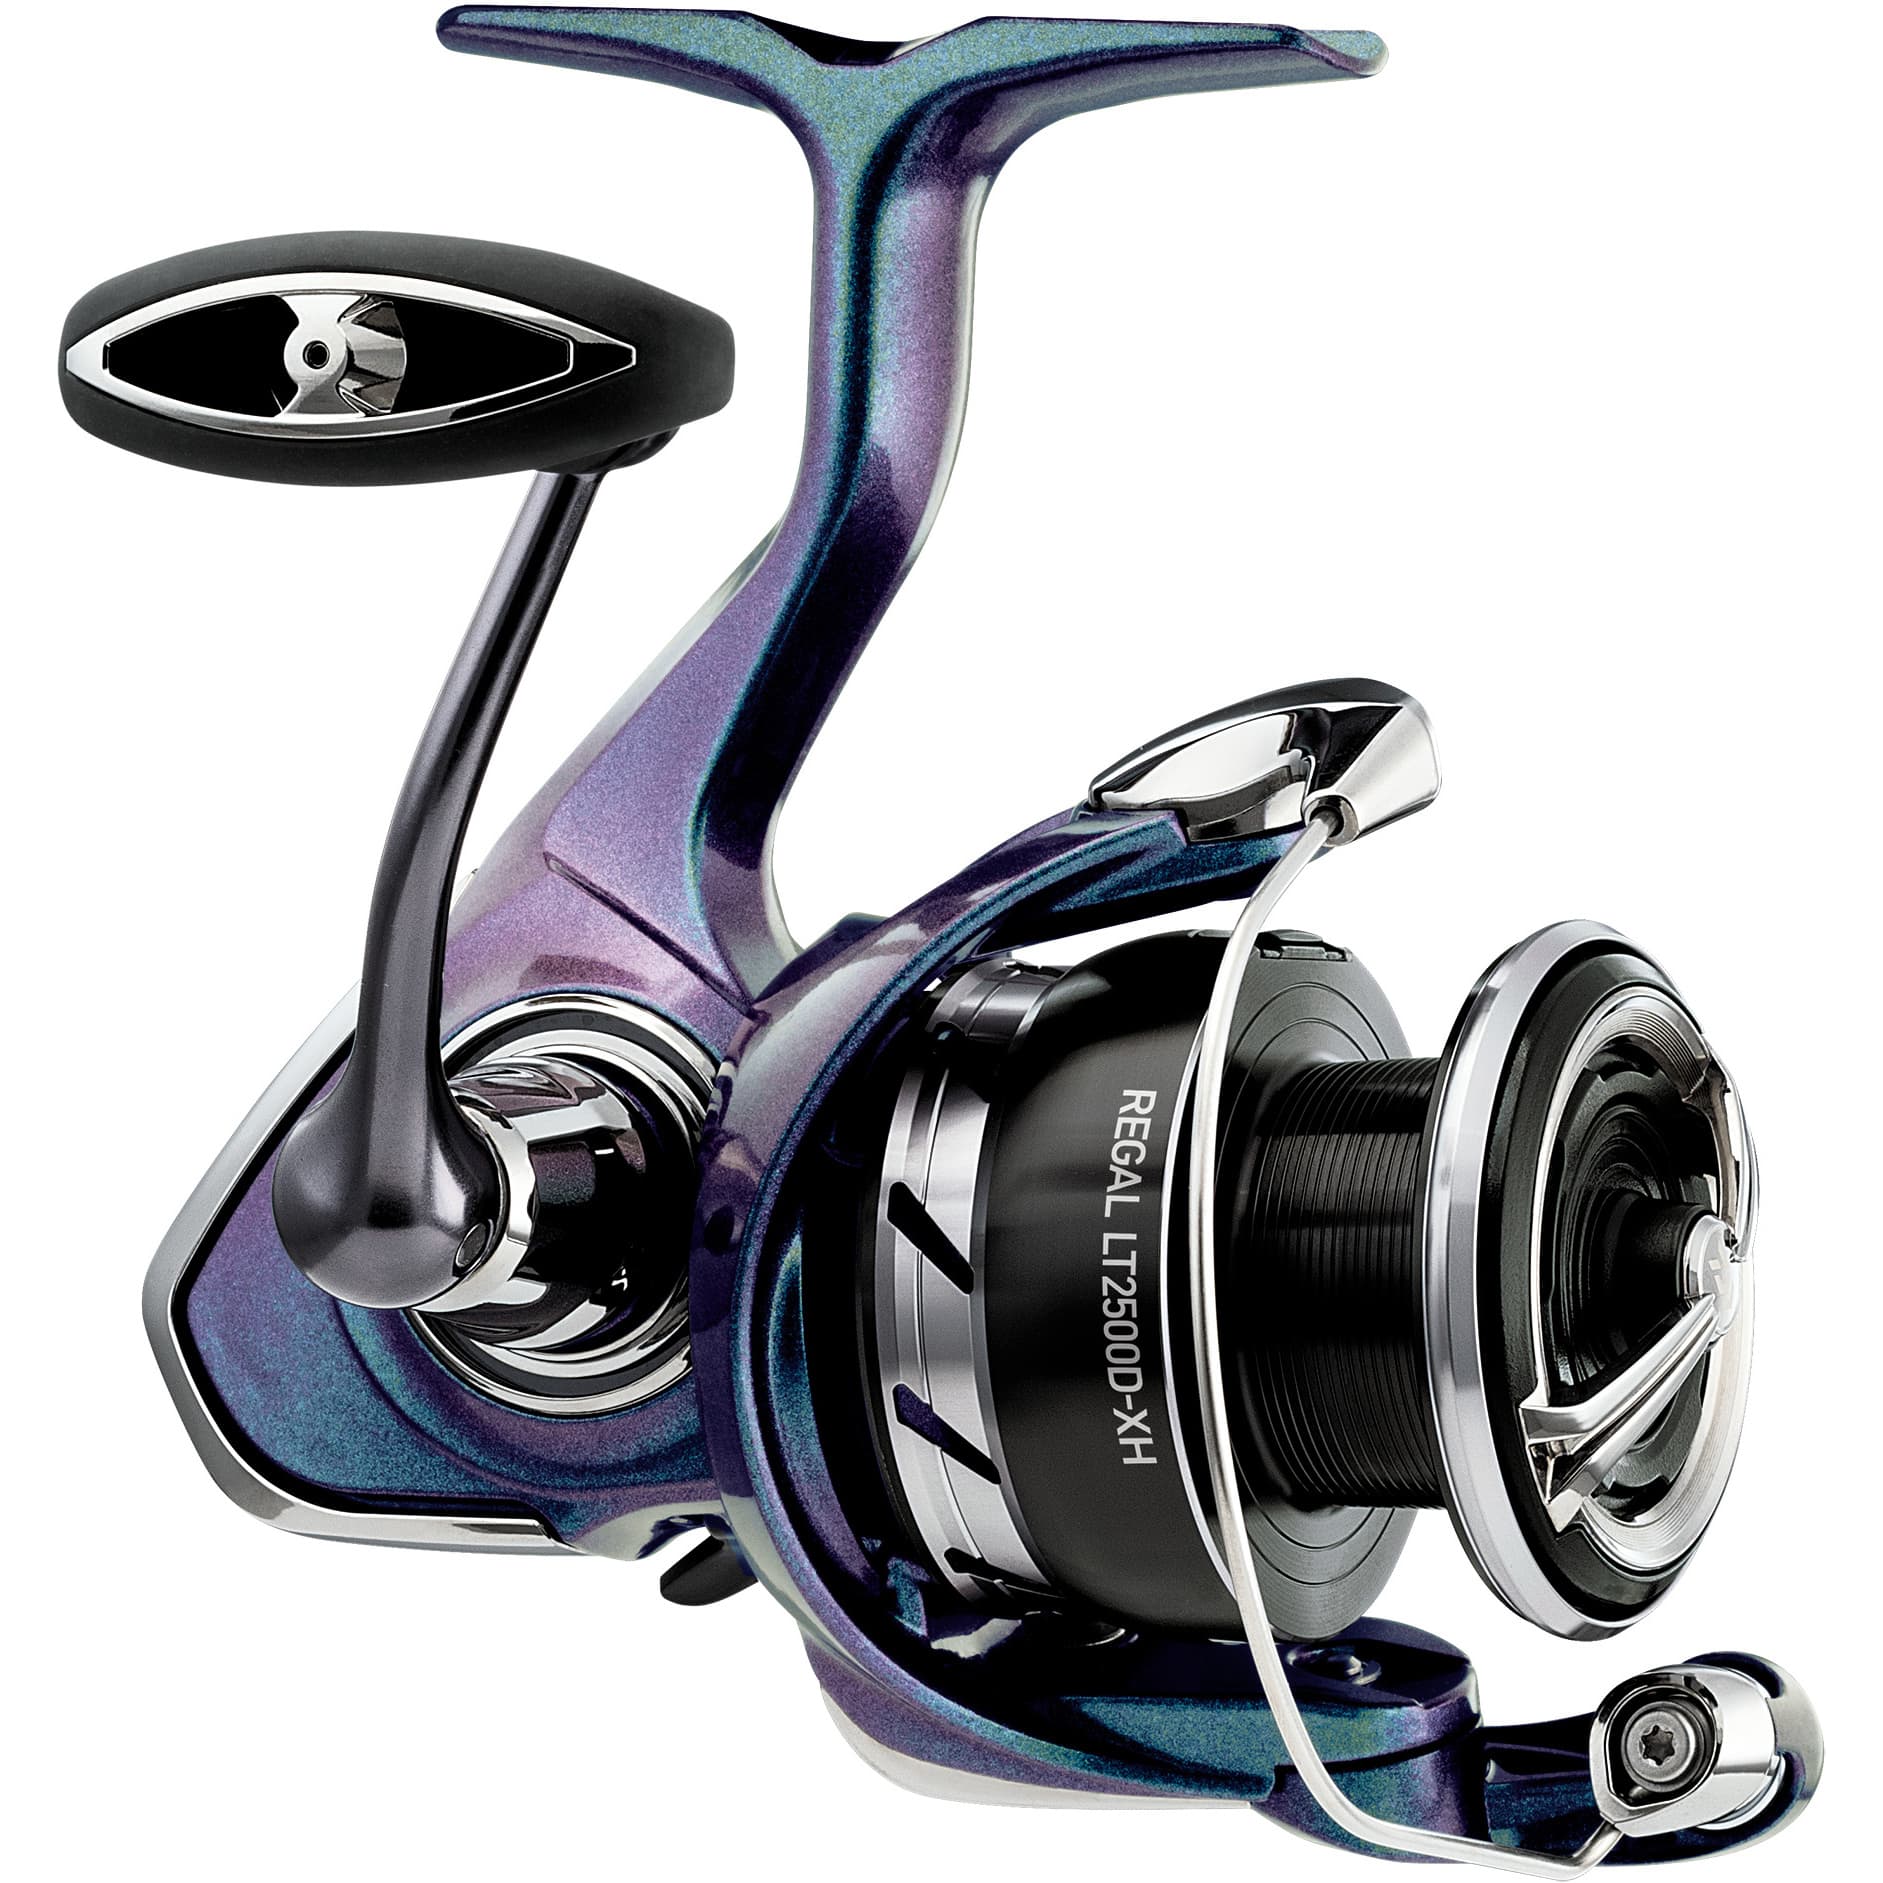 Micro Compact Spinning Reel, Upgrade Mini 100 Metal Small Fishing Reel for  Freshwater and All Season Fishing : Buy Online at Best Price in KSA - Souq  is now : Sporting Goods